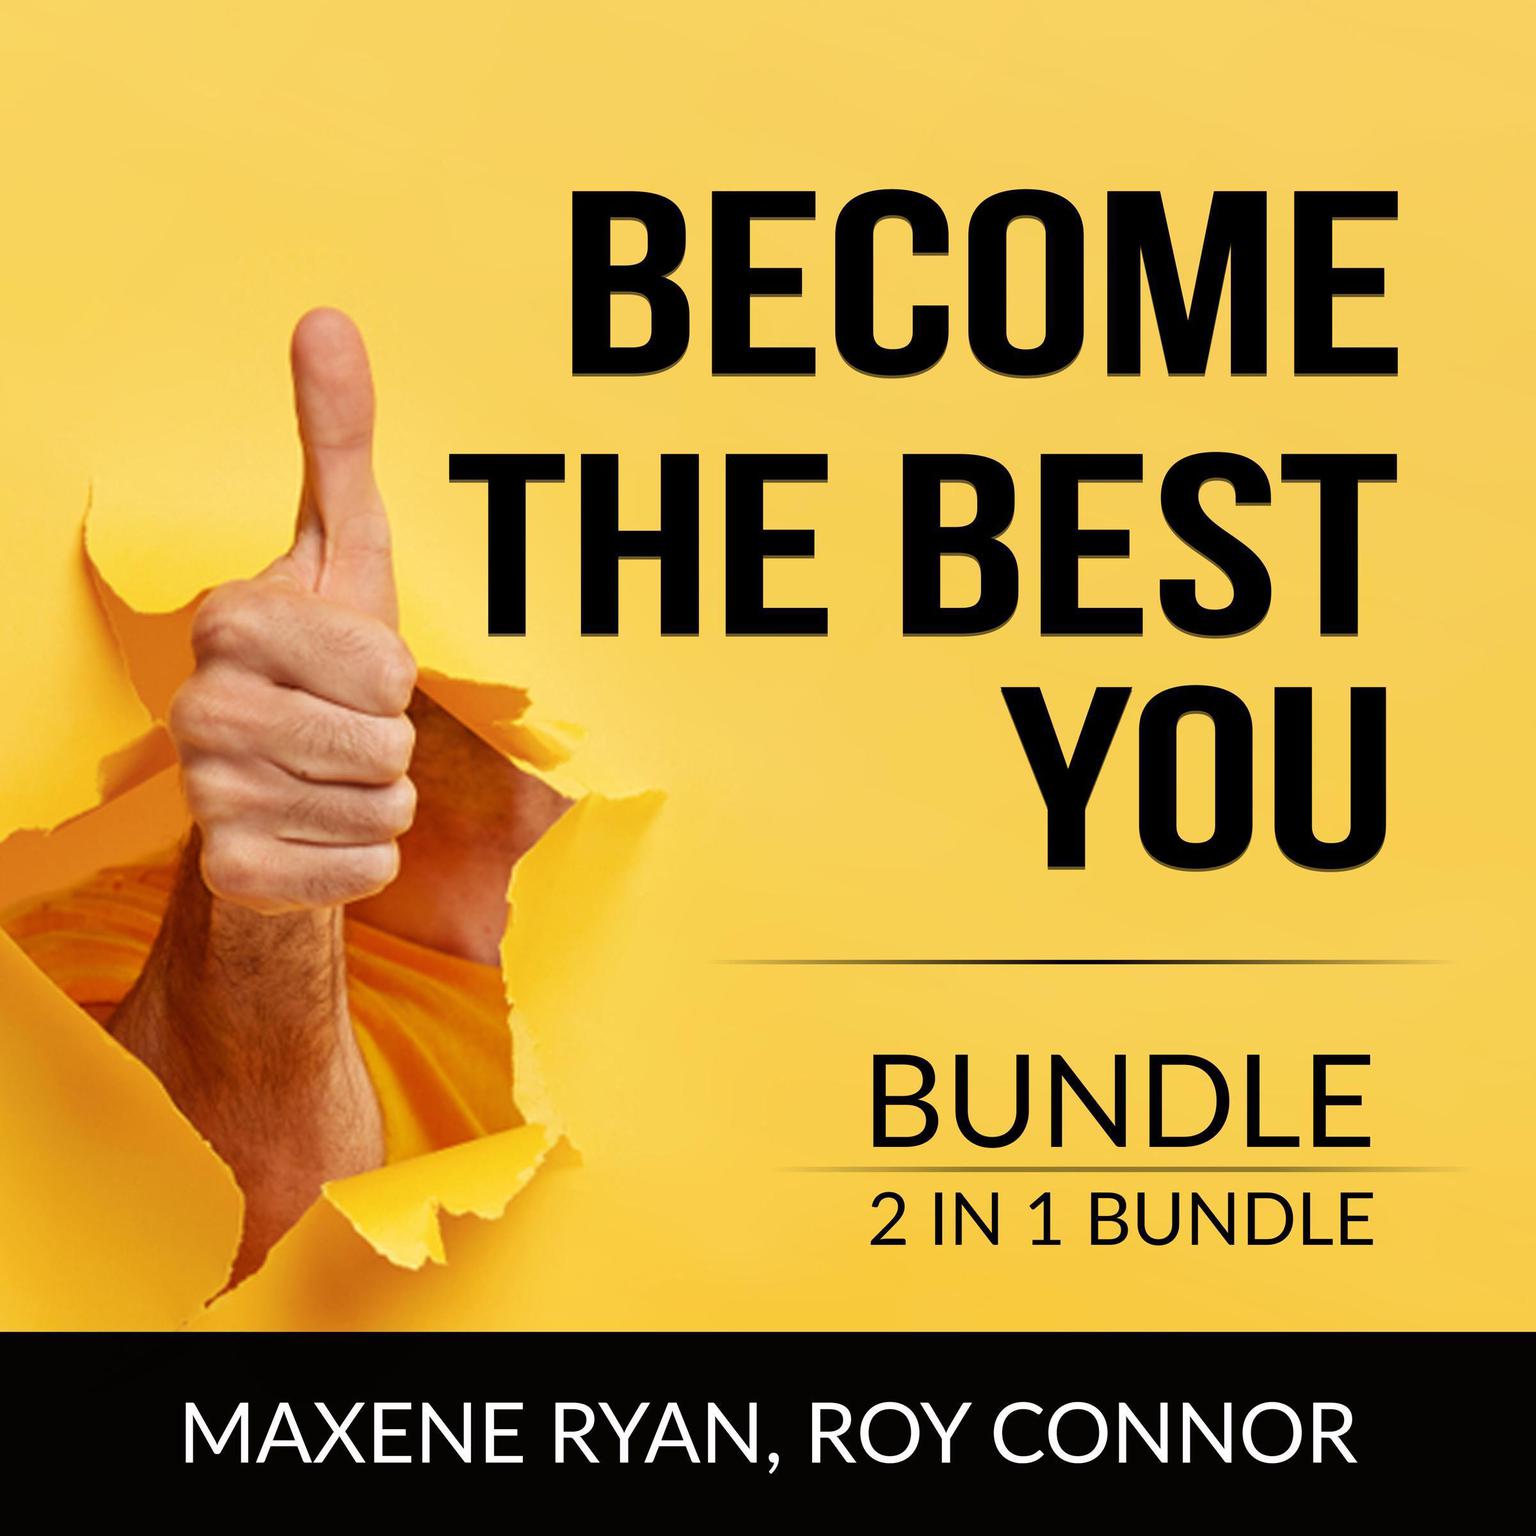 Become the Best You Bundle, 2 IN 1 Bundle:: The Power Within You and The Greatest You  Audiobook, by Roy Connor